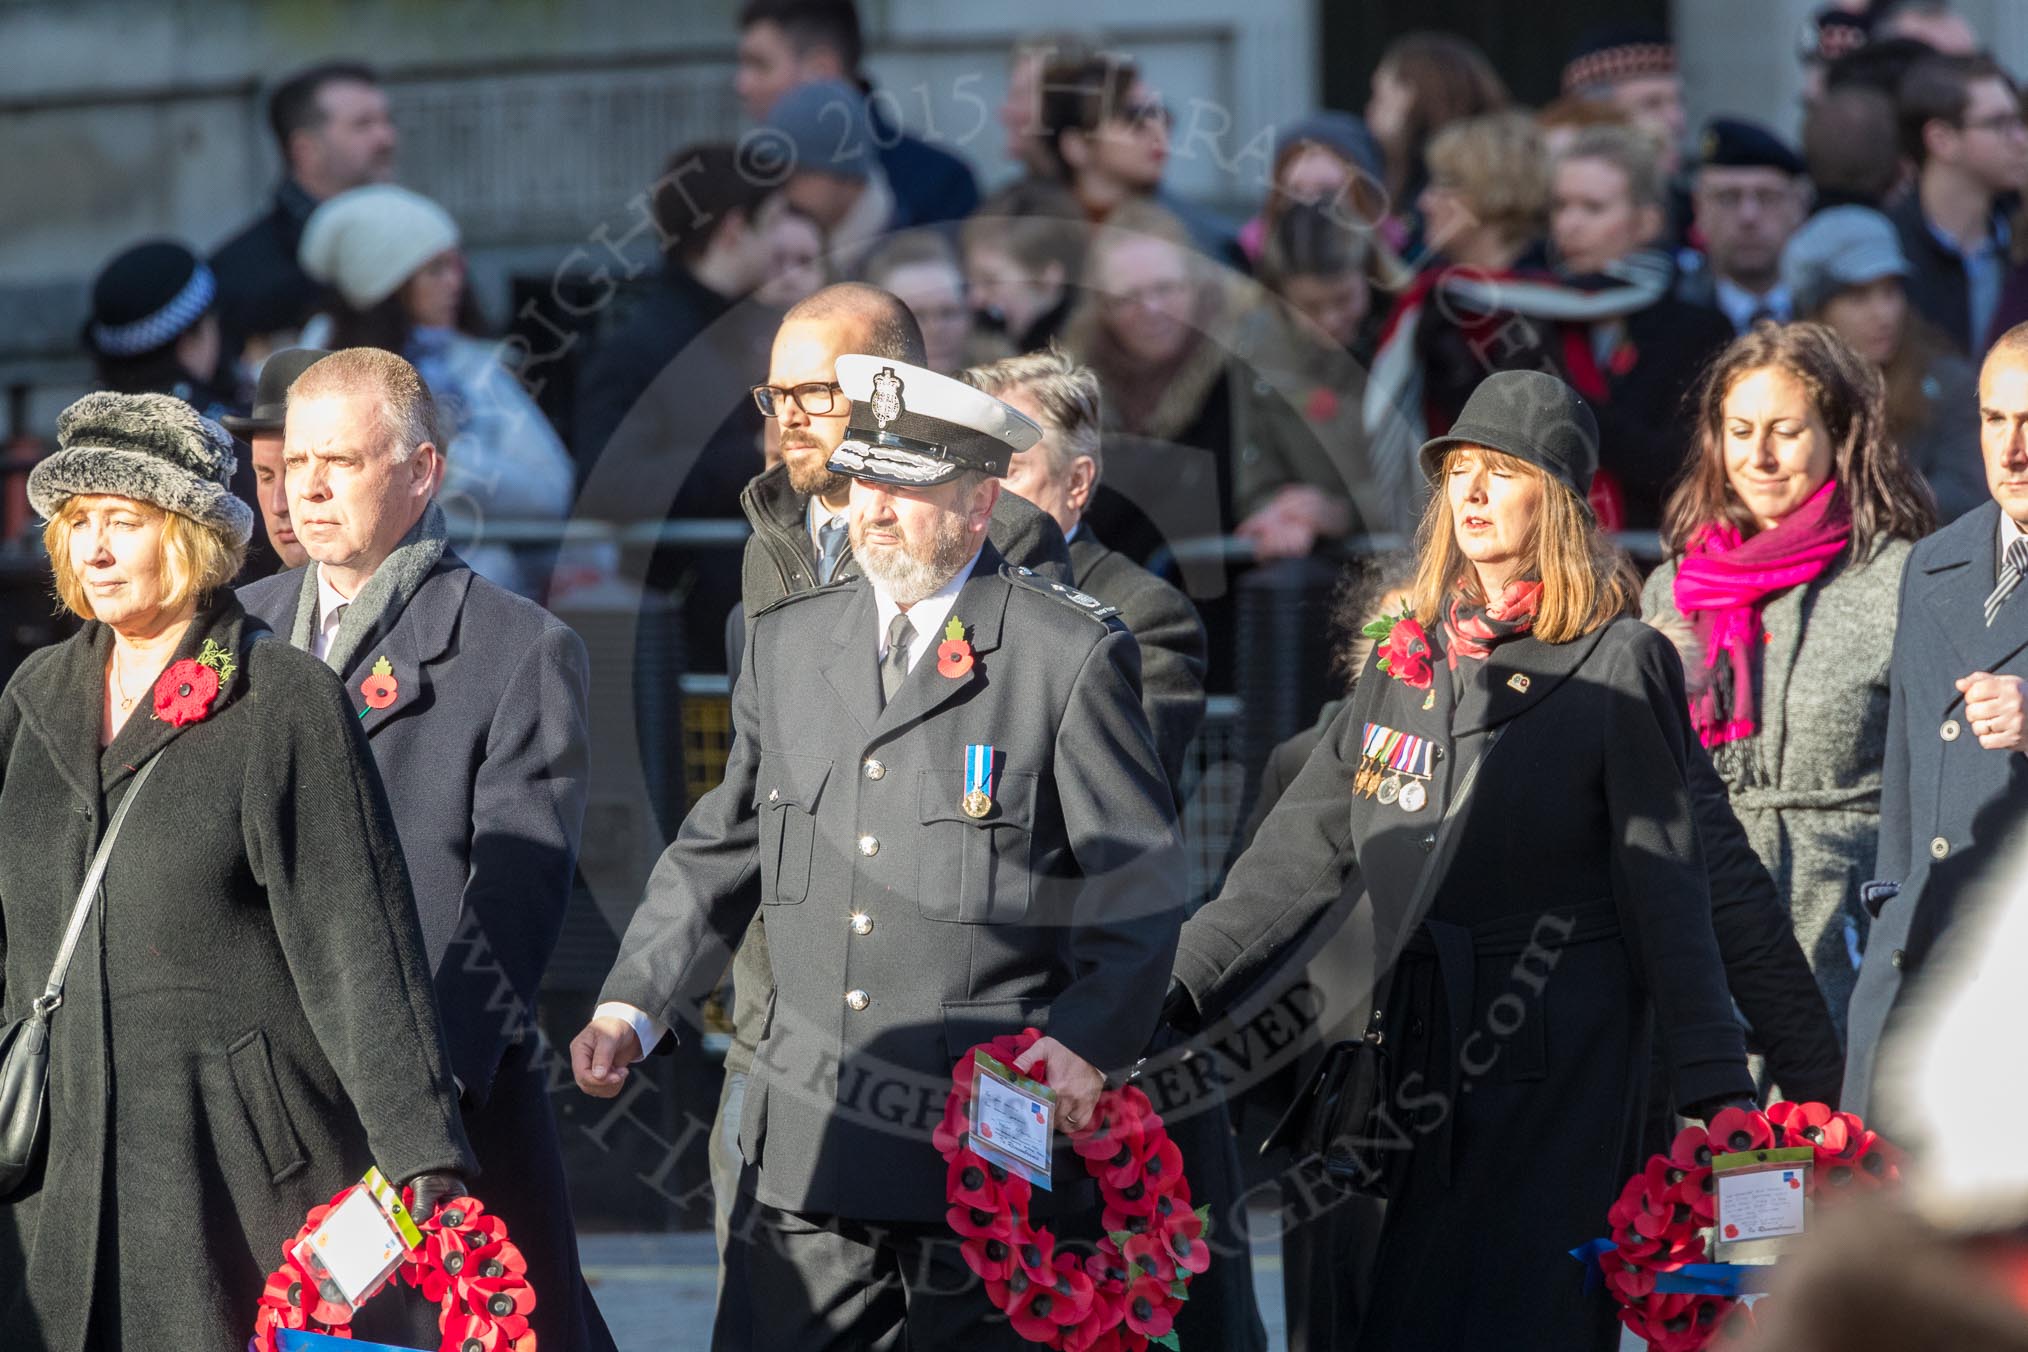 March Past, Remembrance Sunday at the Cenotaph 2016: M52 Munitions Workers Association.
Cenotaph, Whitehall, London SW1,
London,
Greater London,
United Kingdom,
on 13 November 2016 at 13:20, image #3064